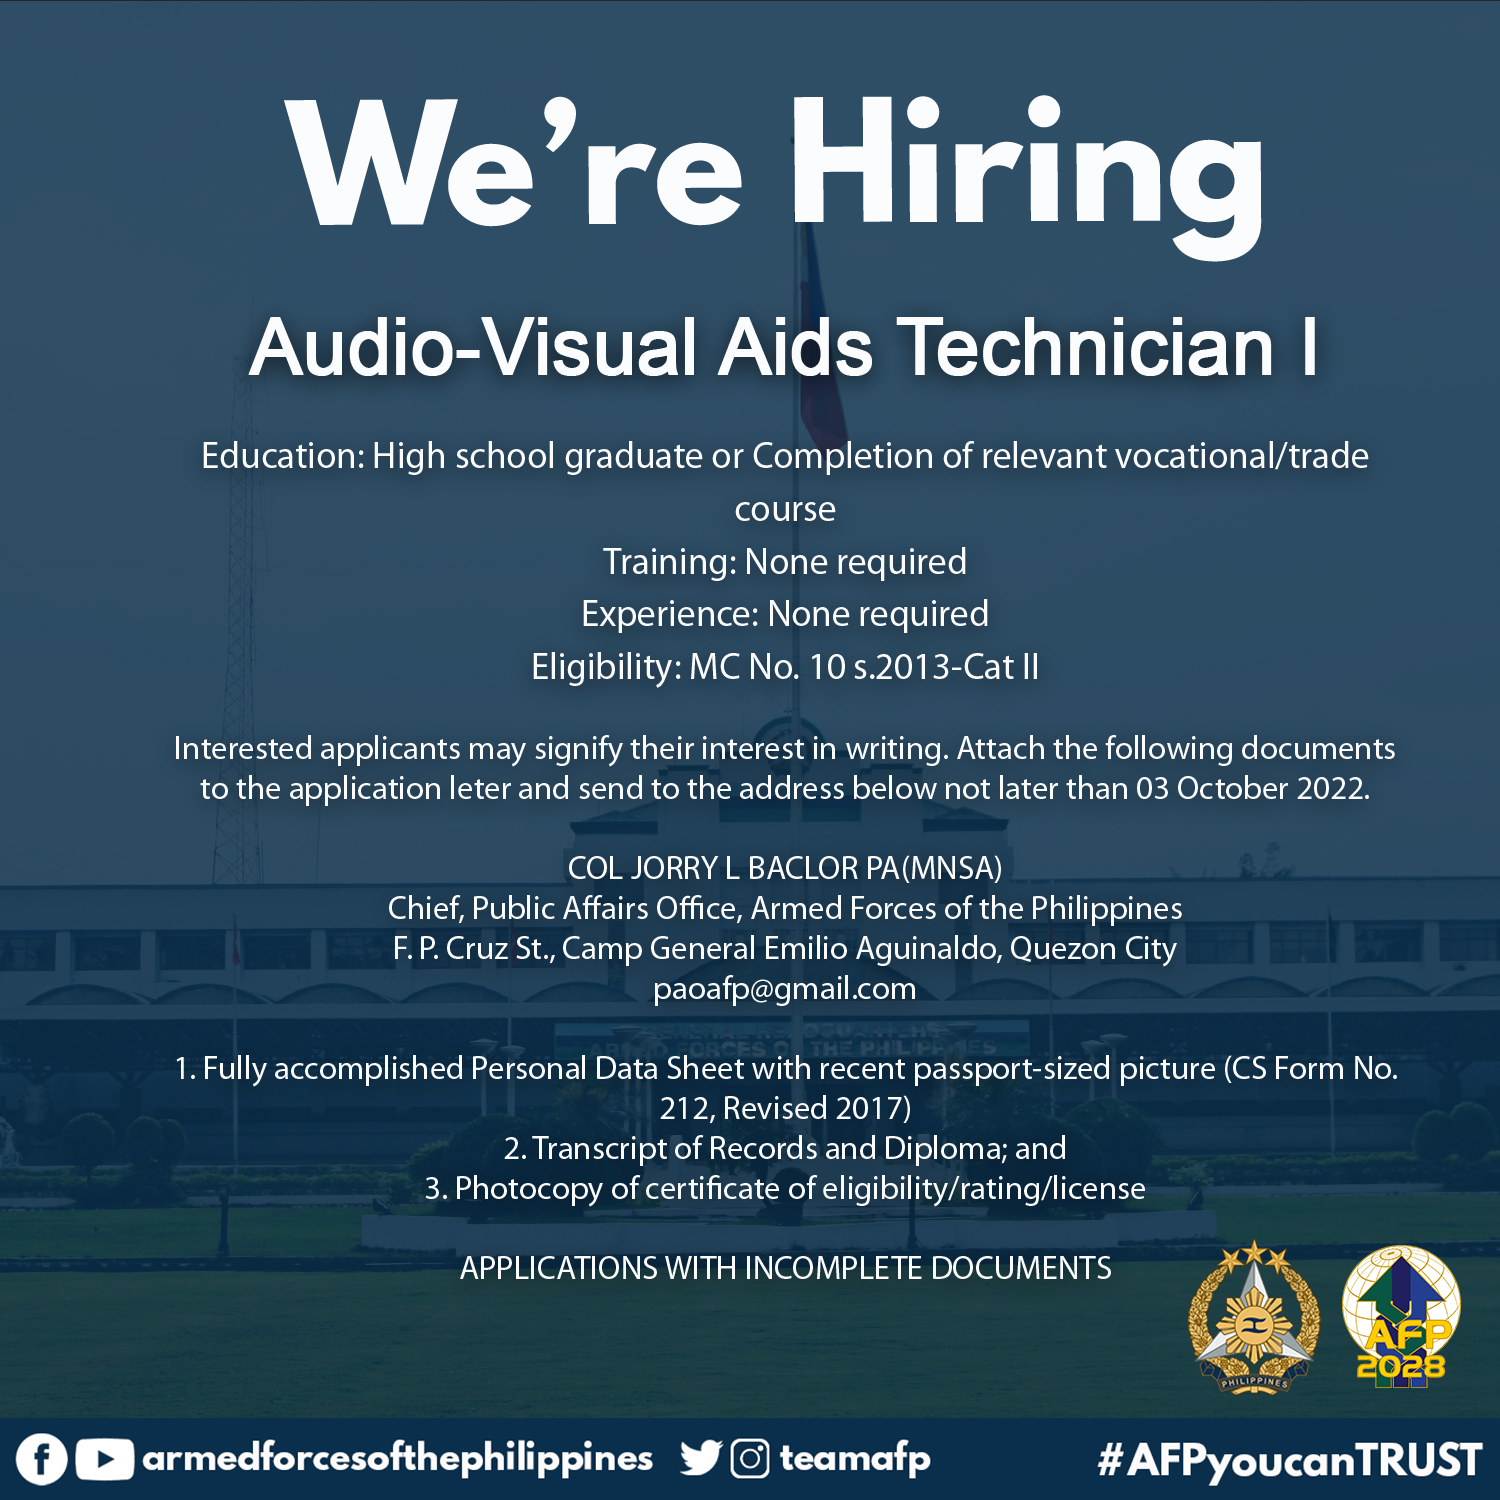 Looking for: Audio-Visual Aids Technician I